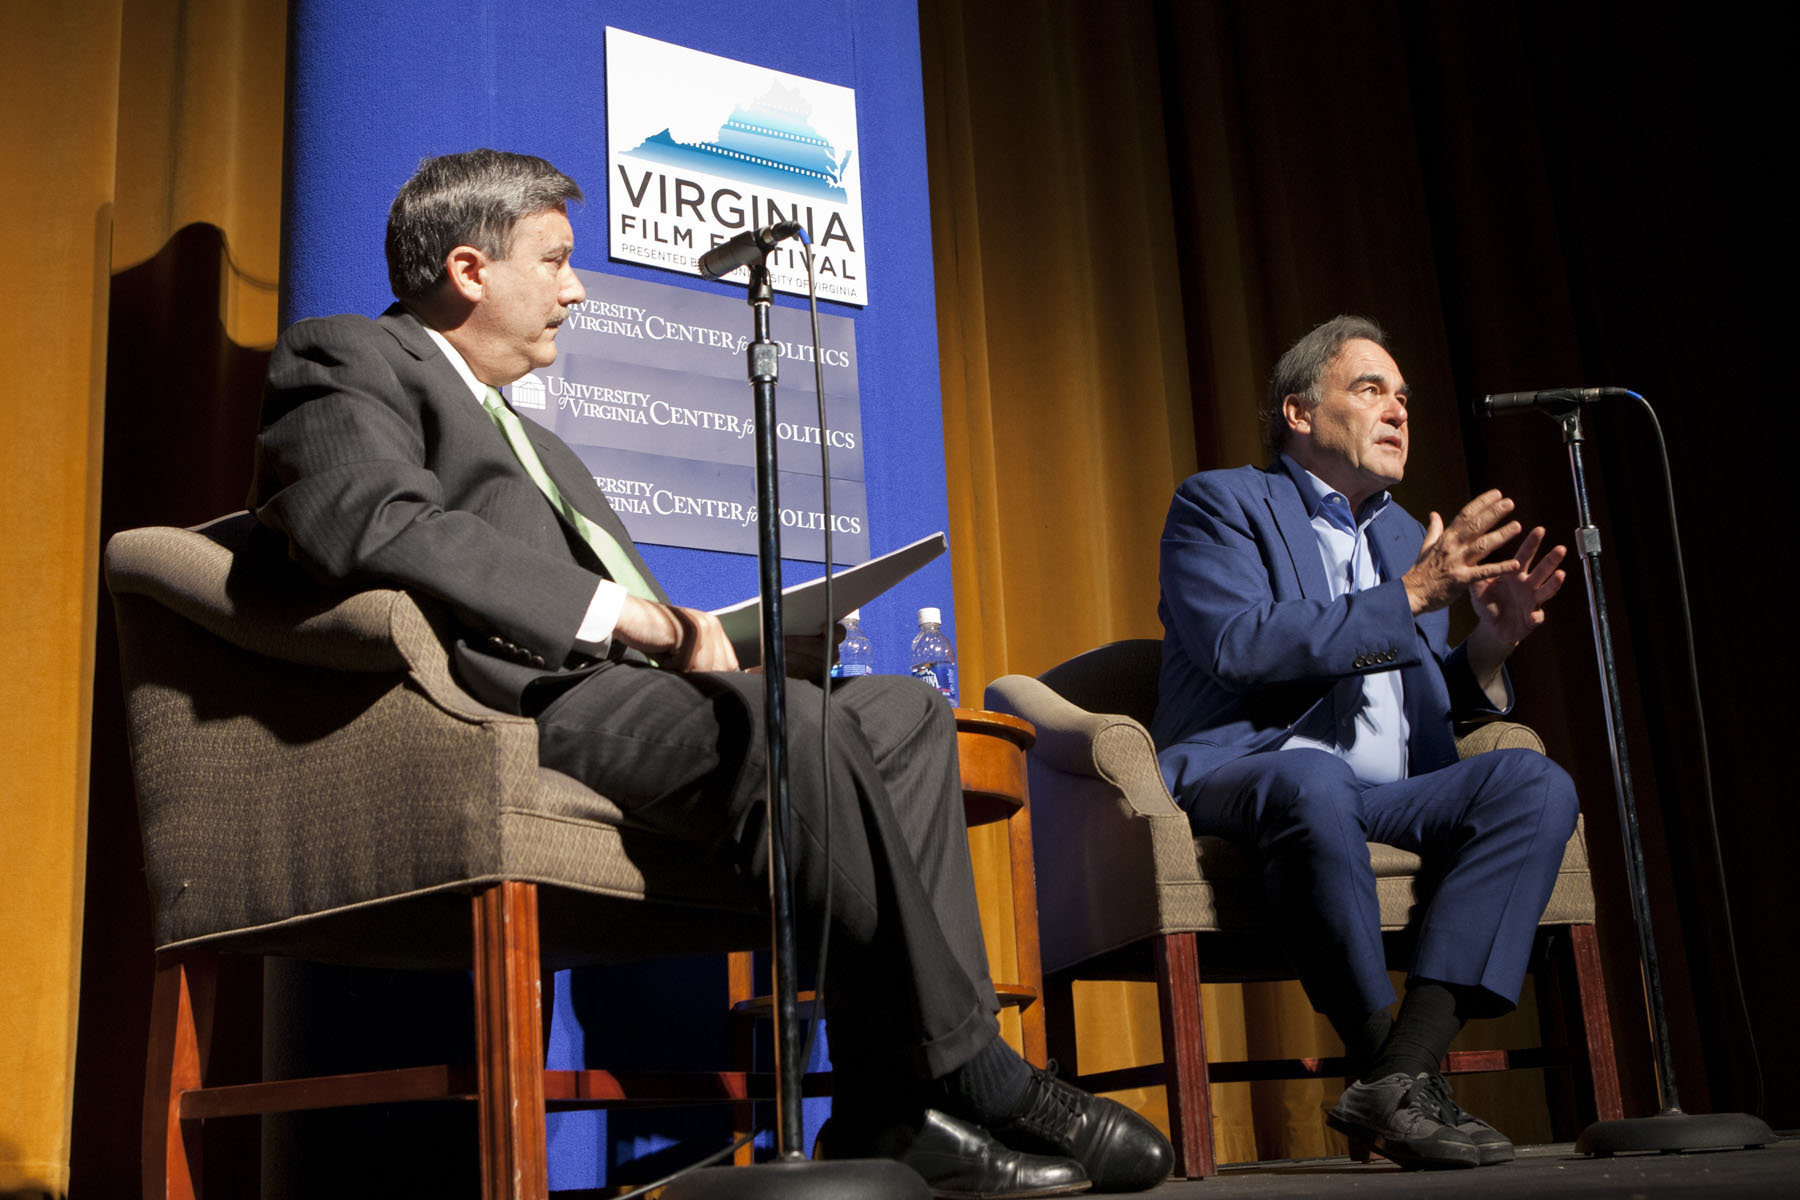 Oliver Stone, right, and Larry Sabato, left, talk to a crowd of people from the stage